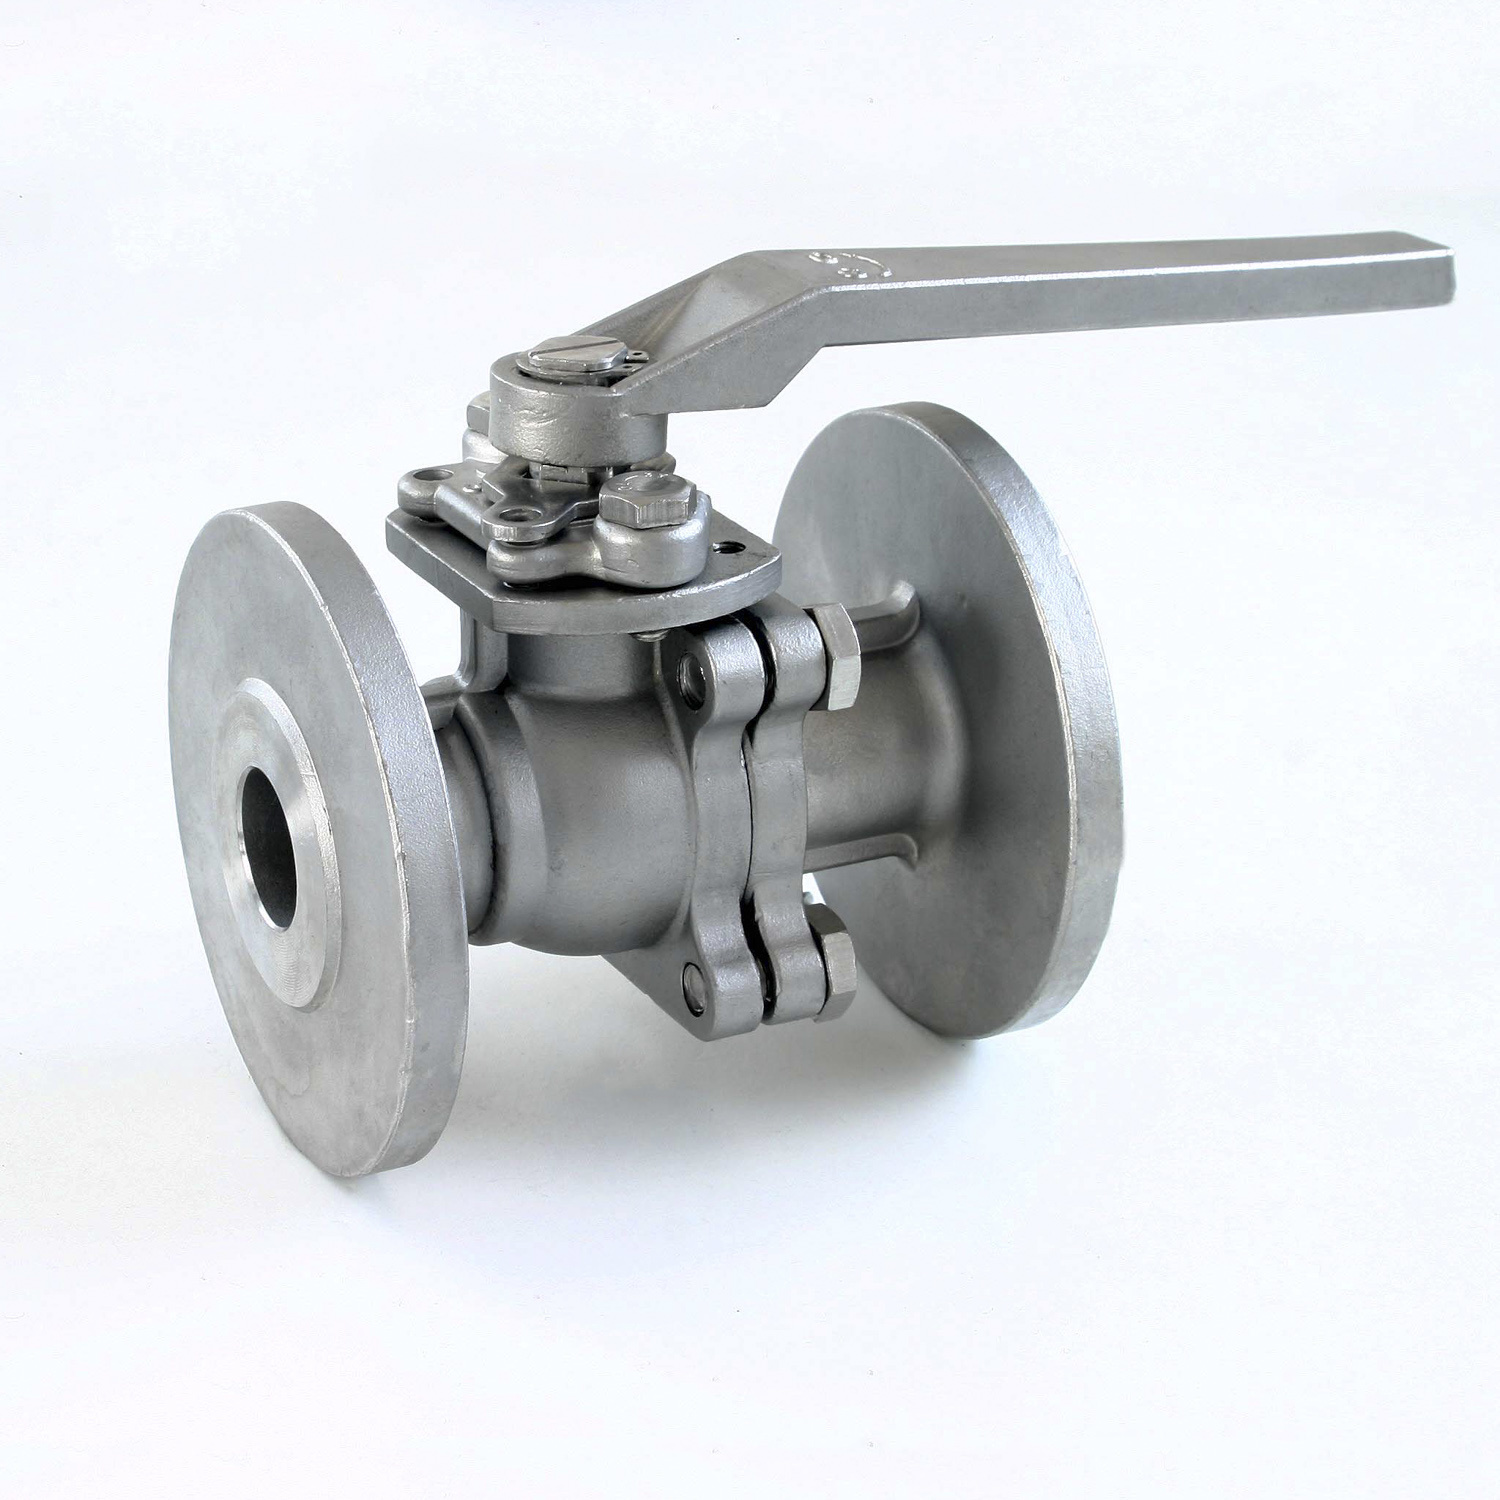 Stainless Steel 2PC Ball Valve with Pn16 Flange End